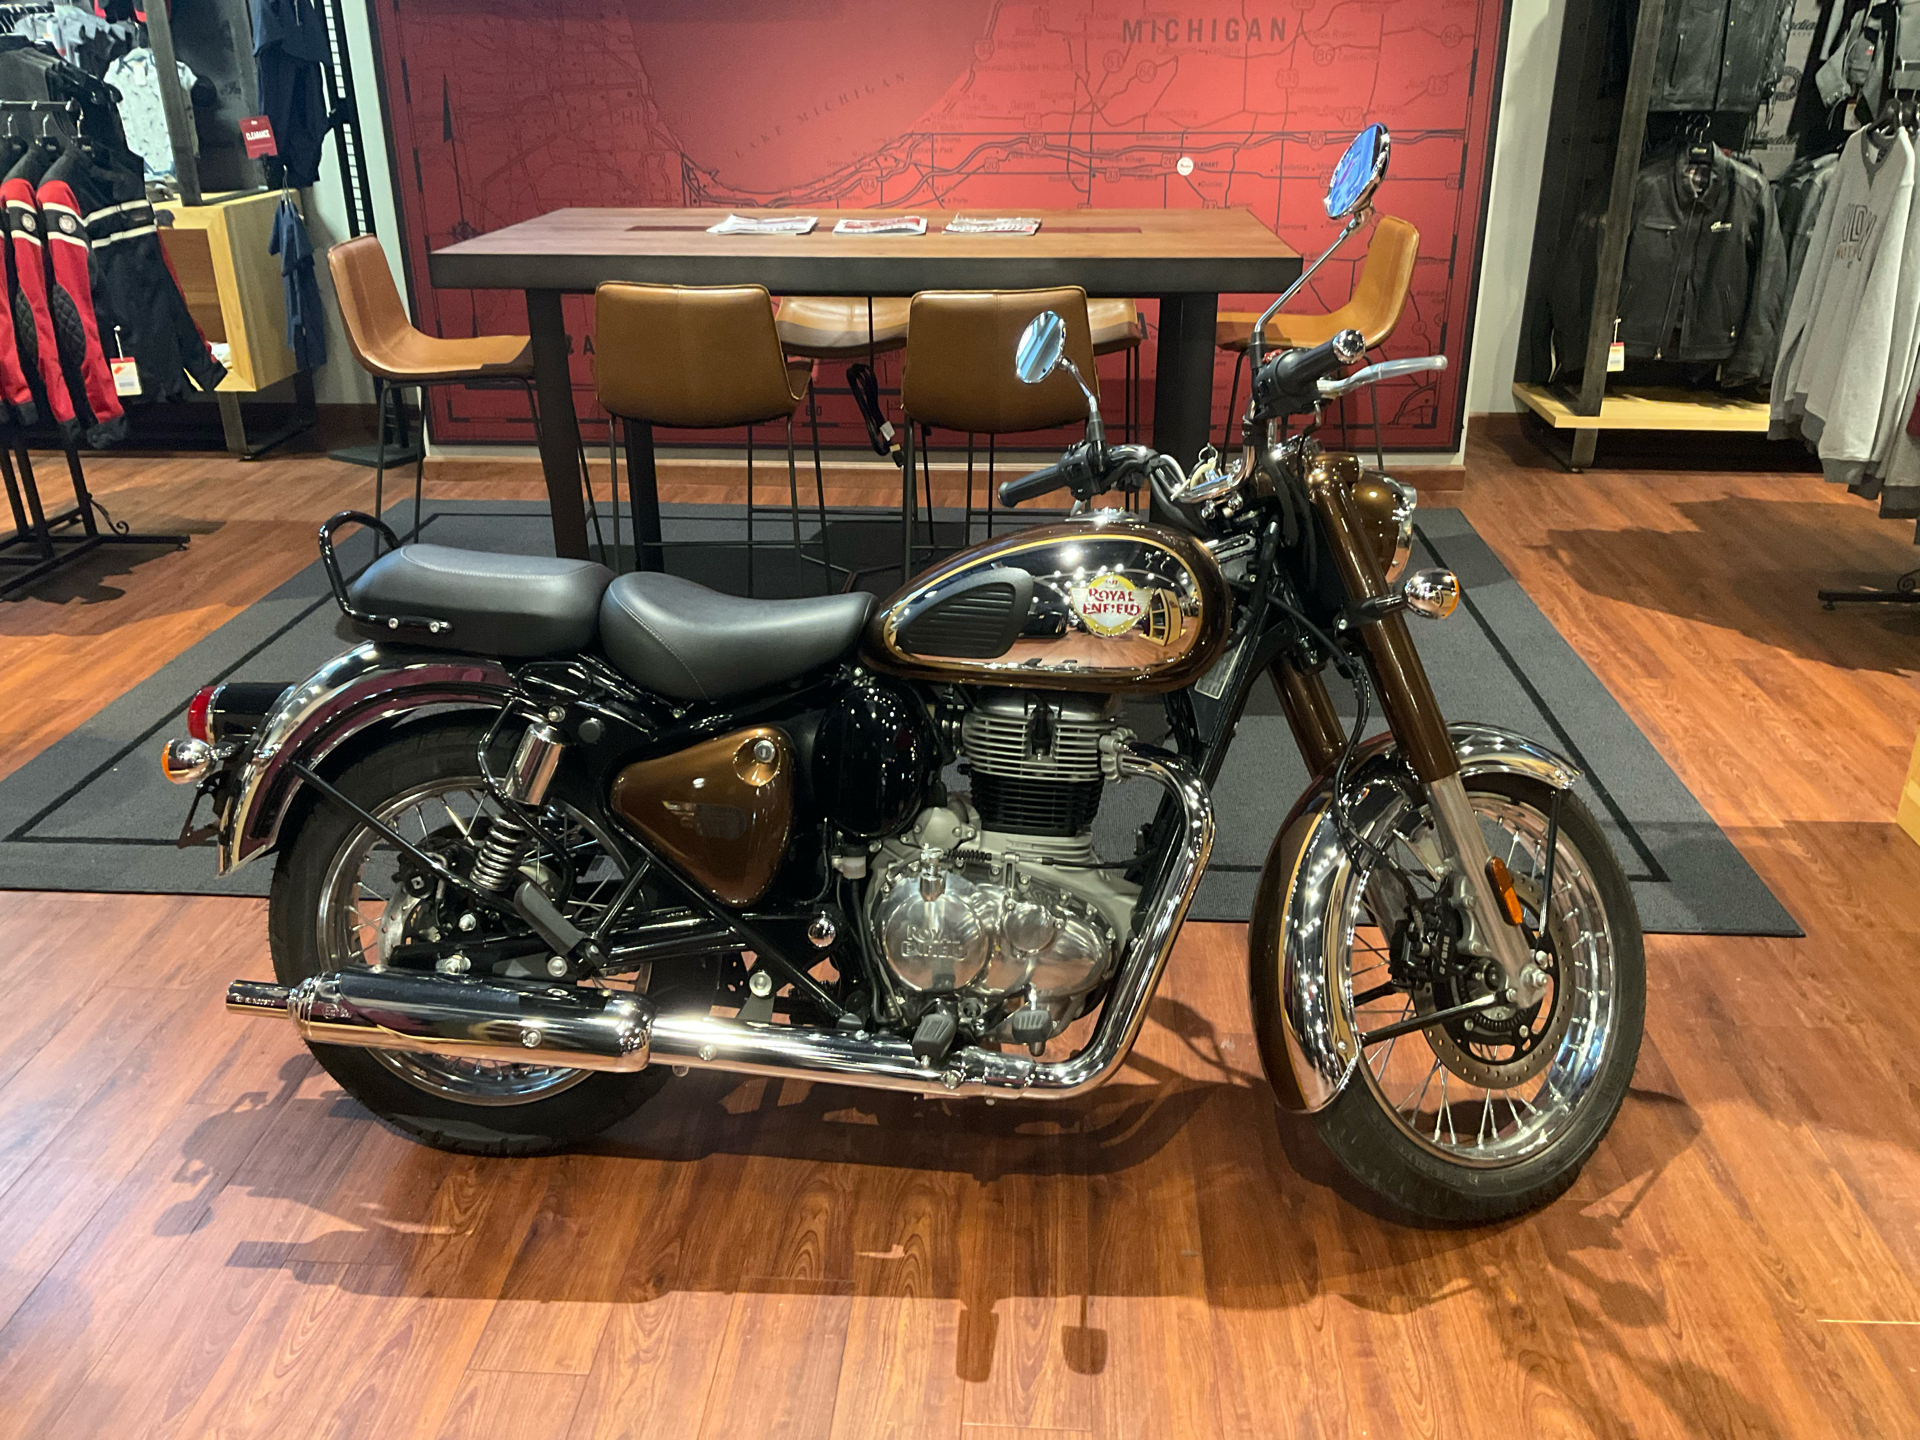 2022 Royal Enfield Classic 350 in Elkhart, Indiana - Photo 1